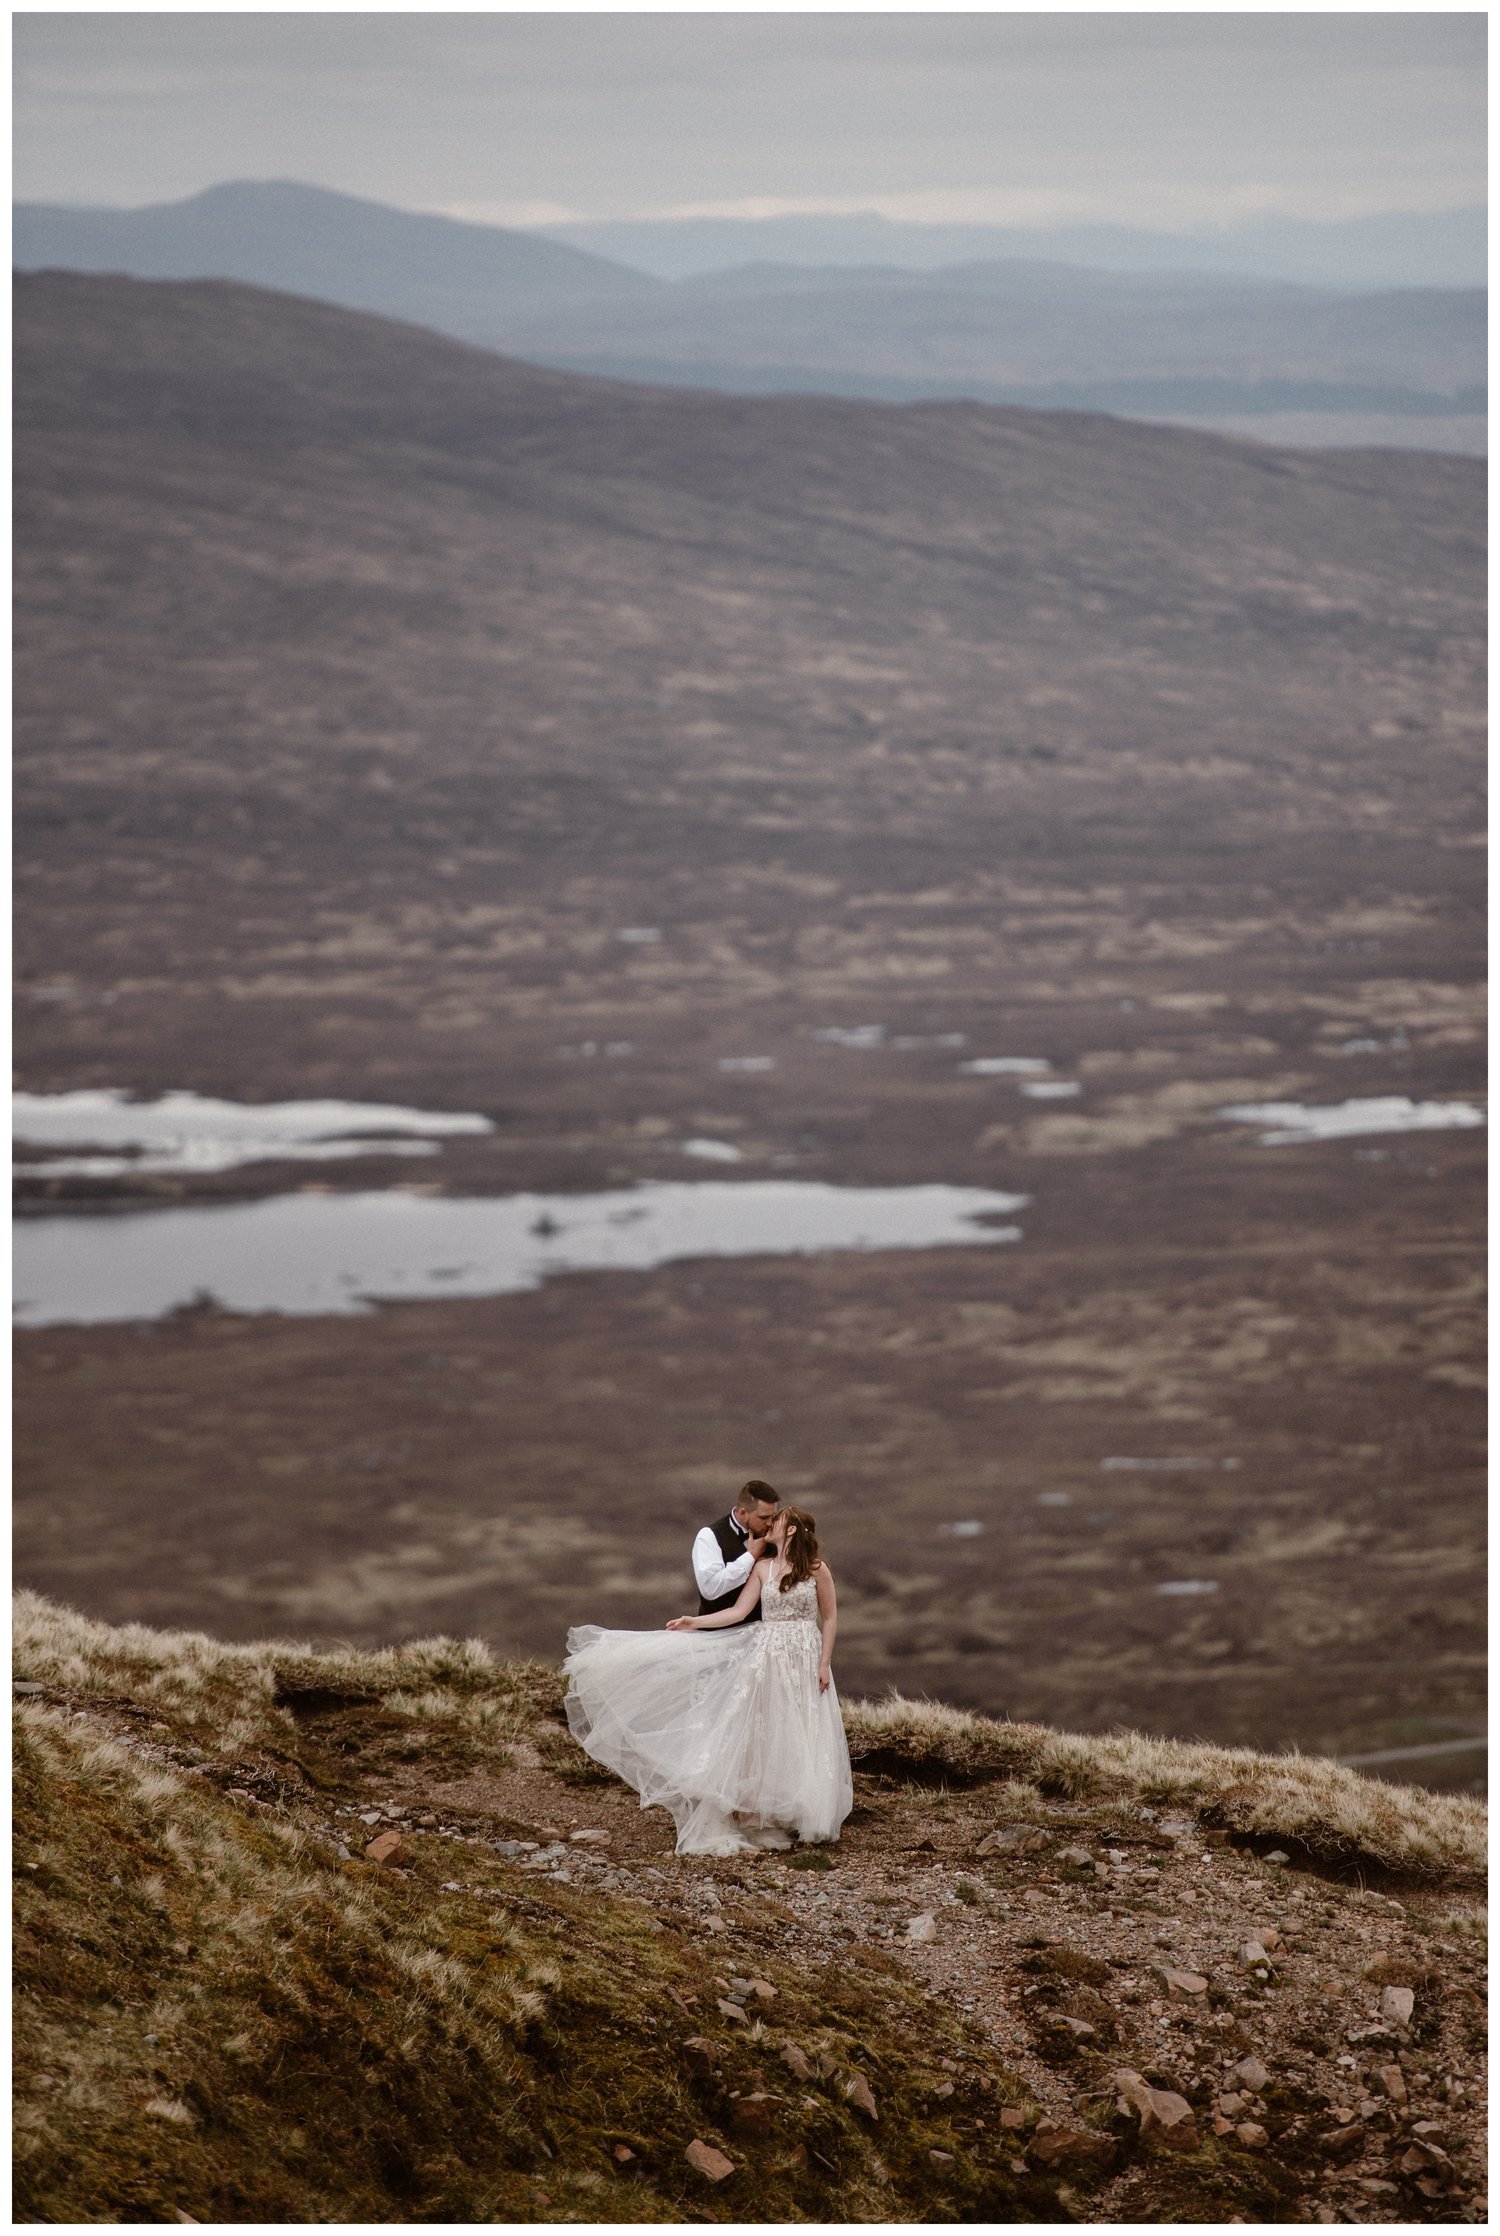 Bride and groom share a kiss on their elopement day in the Scottish Highlands.